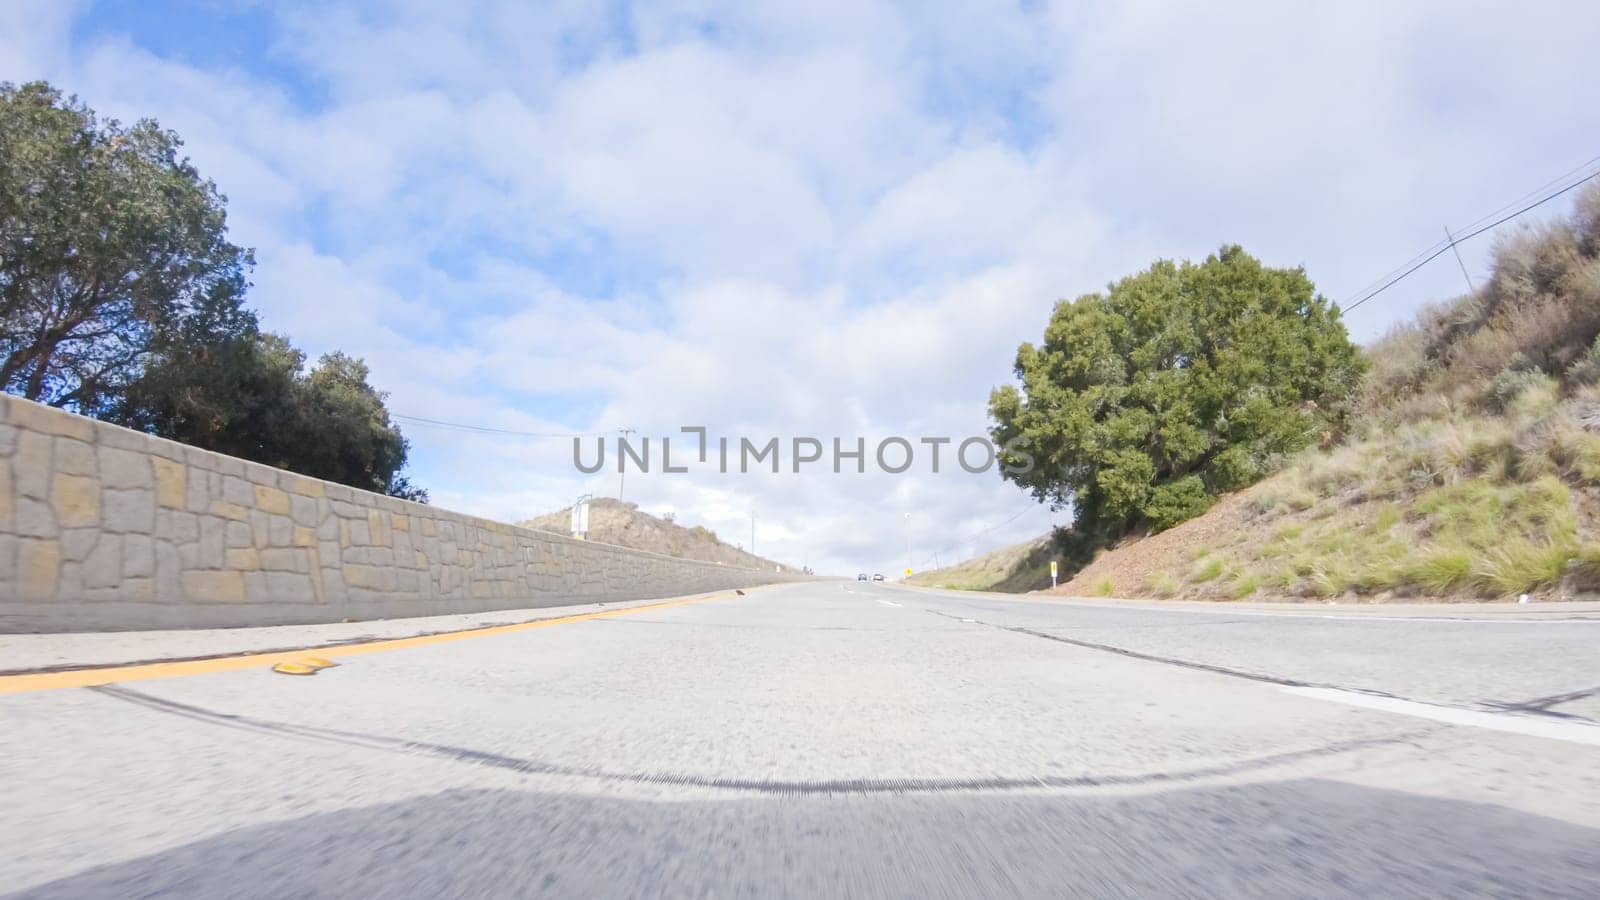 On a crisp winter day, a car cruises along the iconic Highway 101 near San Luis Obispo, California. The surrounding landscape is brownish and subdued, with rolling hills and patches of coastal vegetation flanking the winding road.